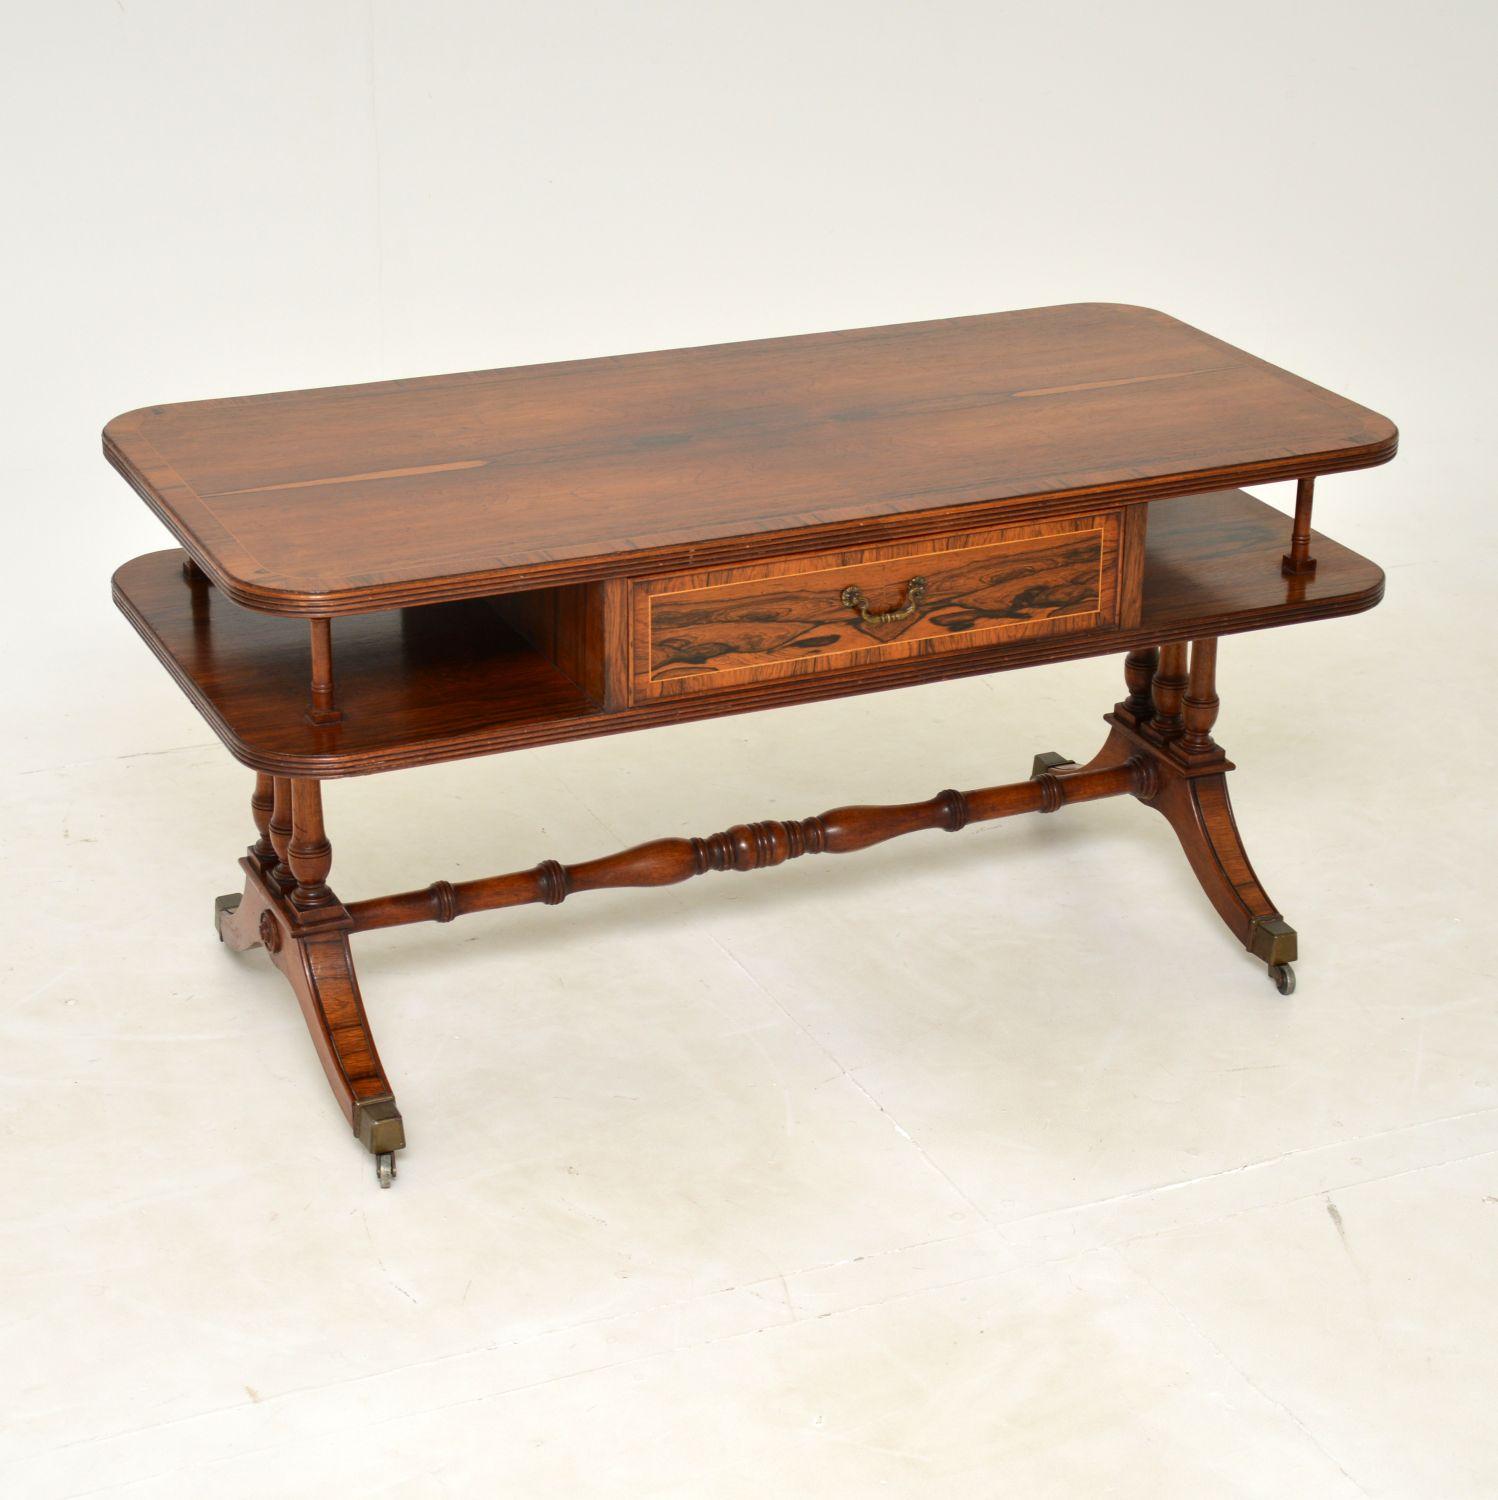 A stunning antique coffee table in the Regency style. This was made in England, it dates from around the 1930’s.

The quality is amazing, and it is very rare to see a model like this in such beautiful wood. The design is very stylish, the colour